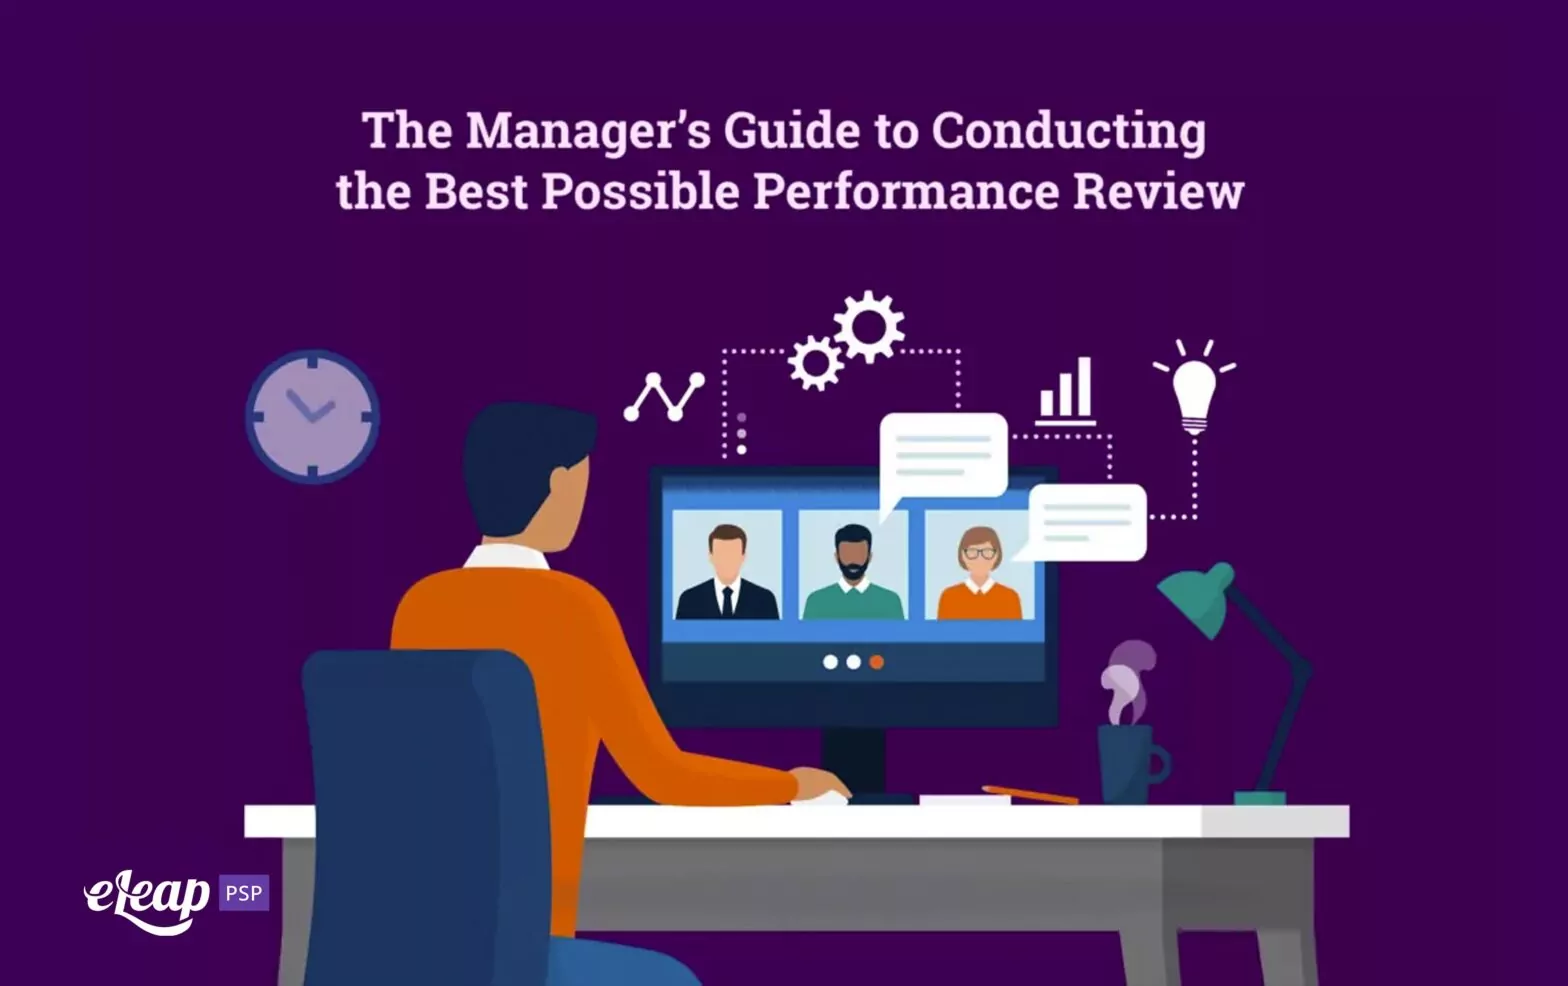 The Manager’s Guide to Conducting the Best Possible Performance Review